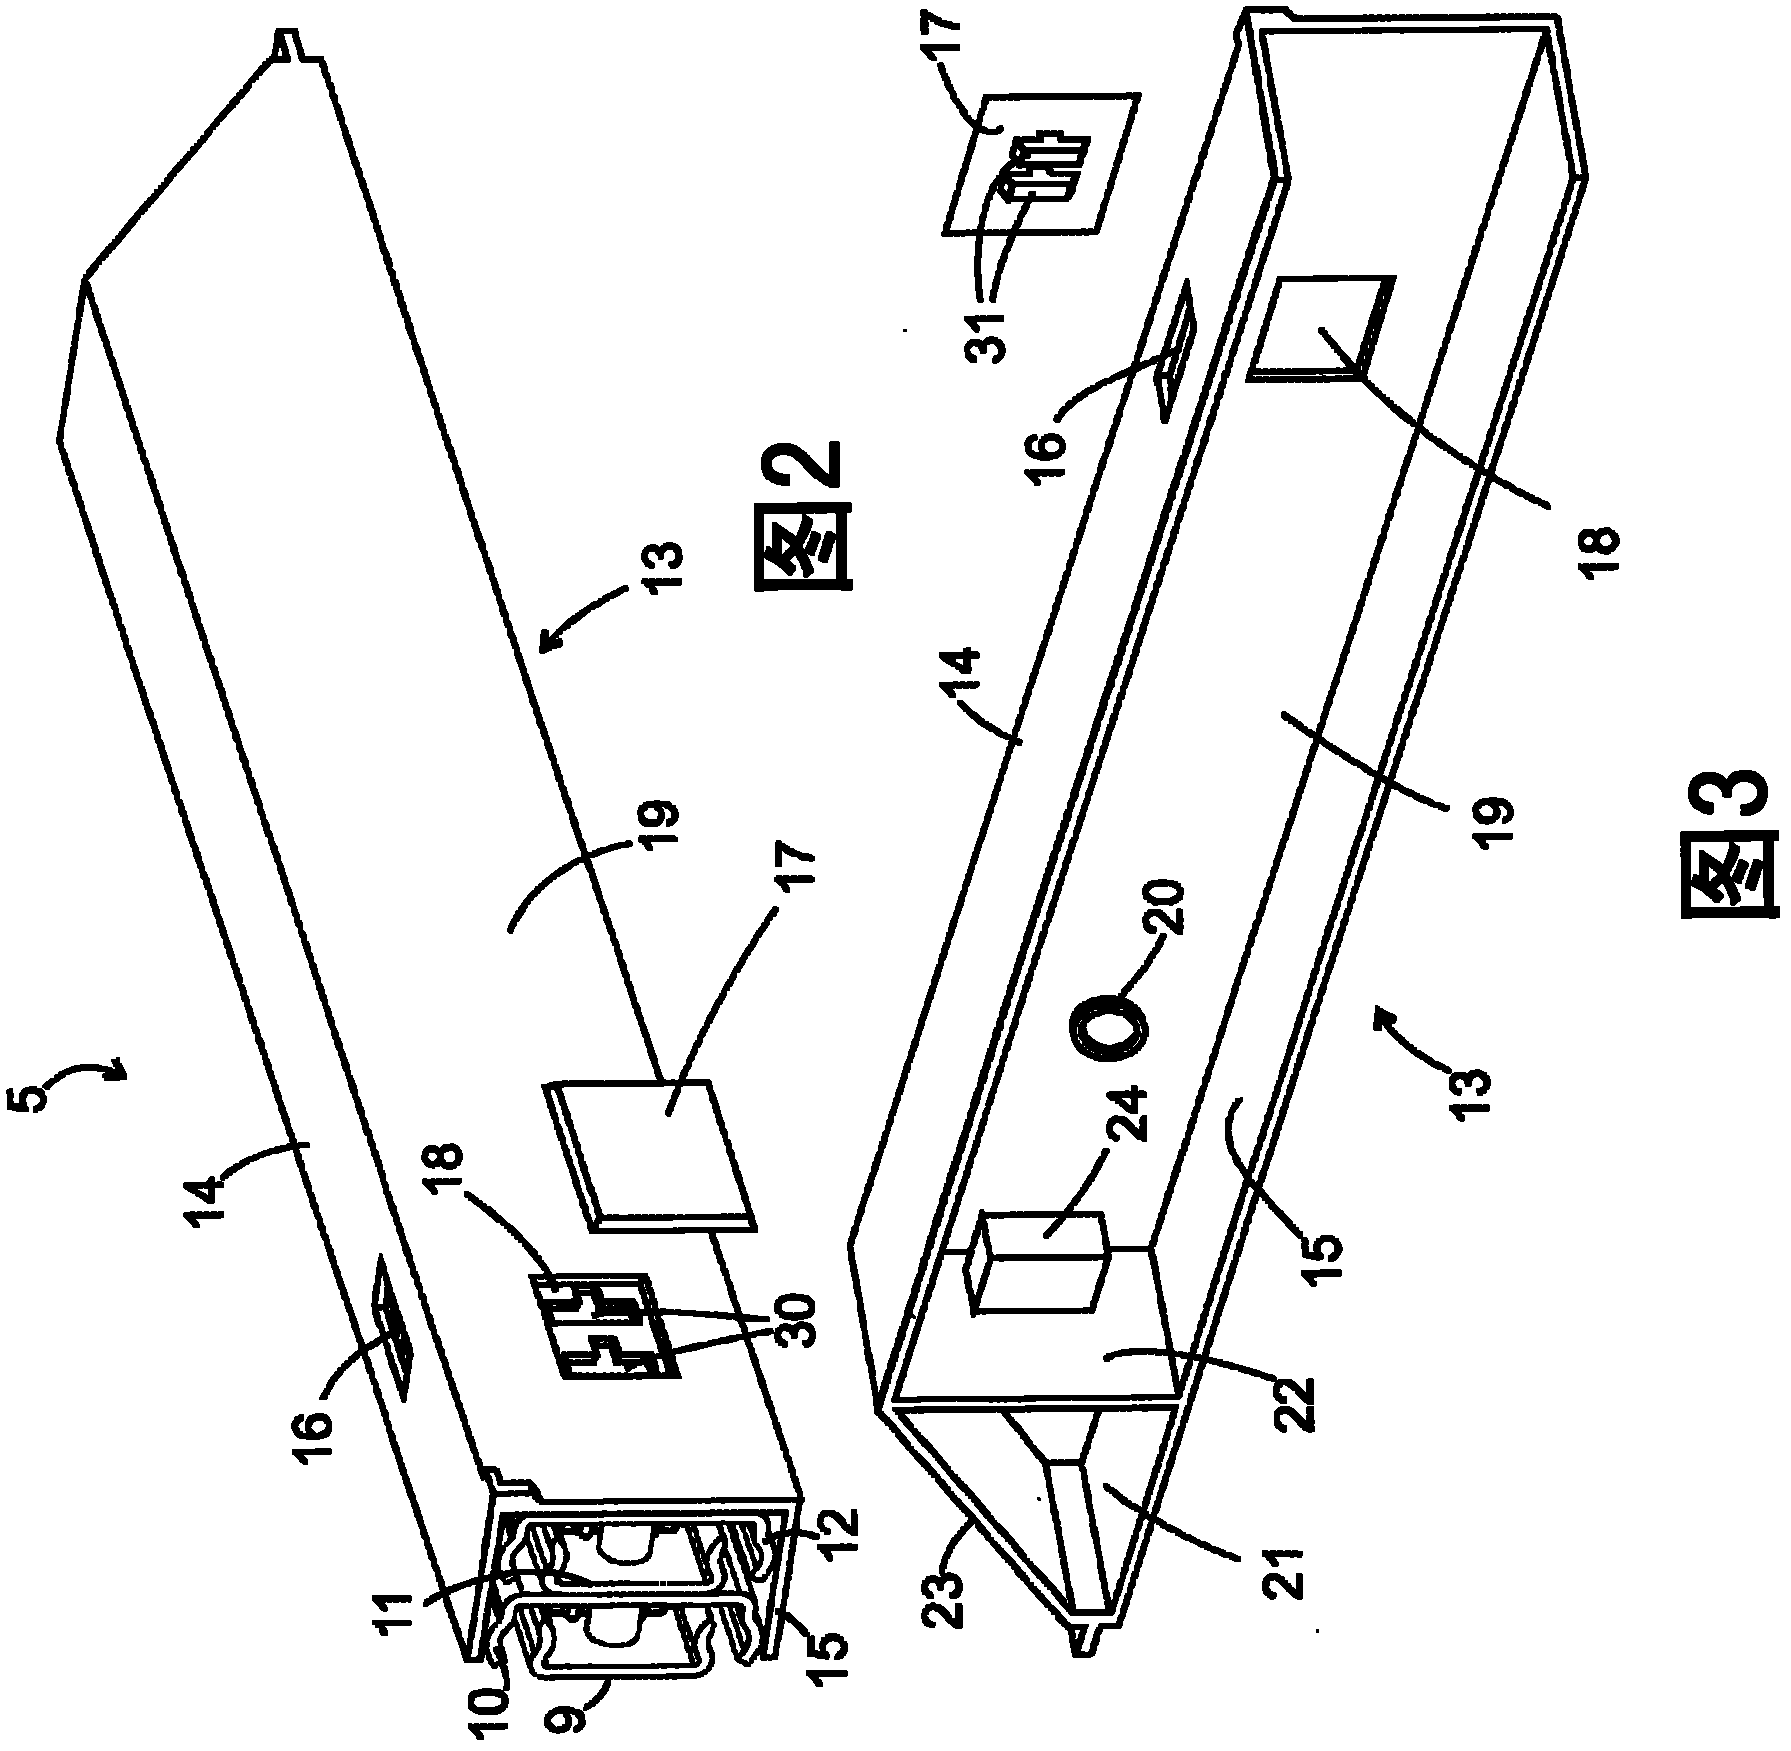 Refrigeration device having telescopic pull-out element